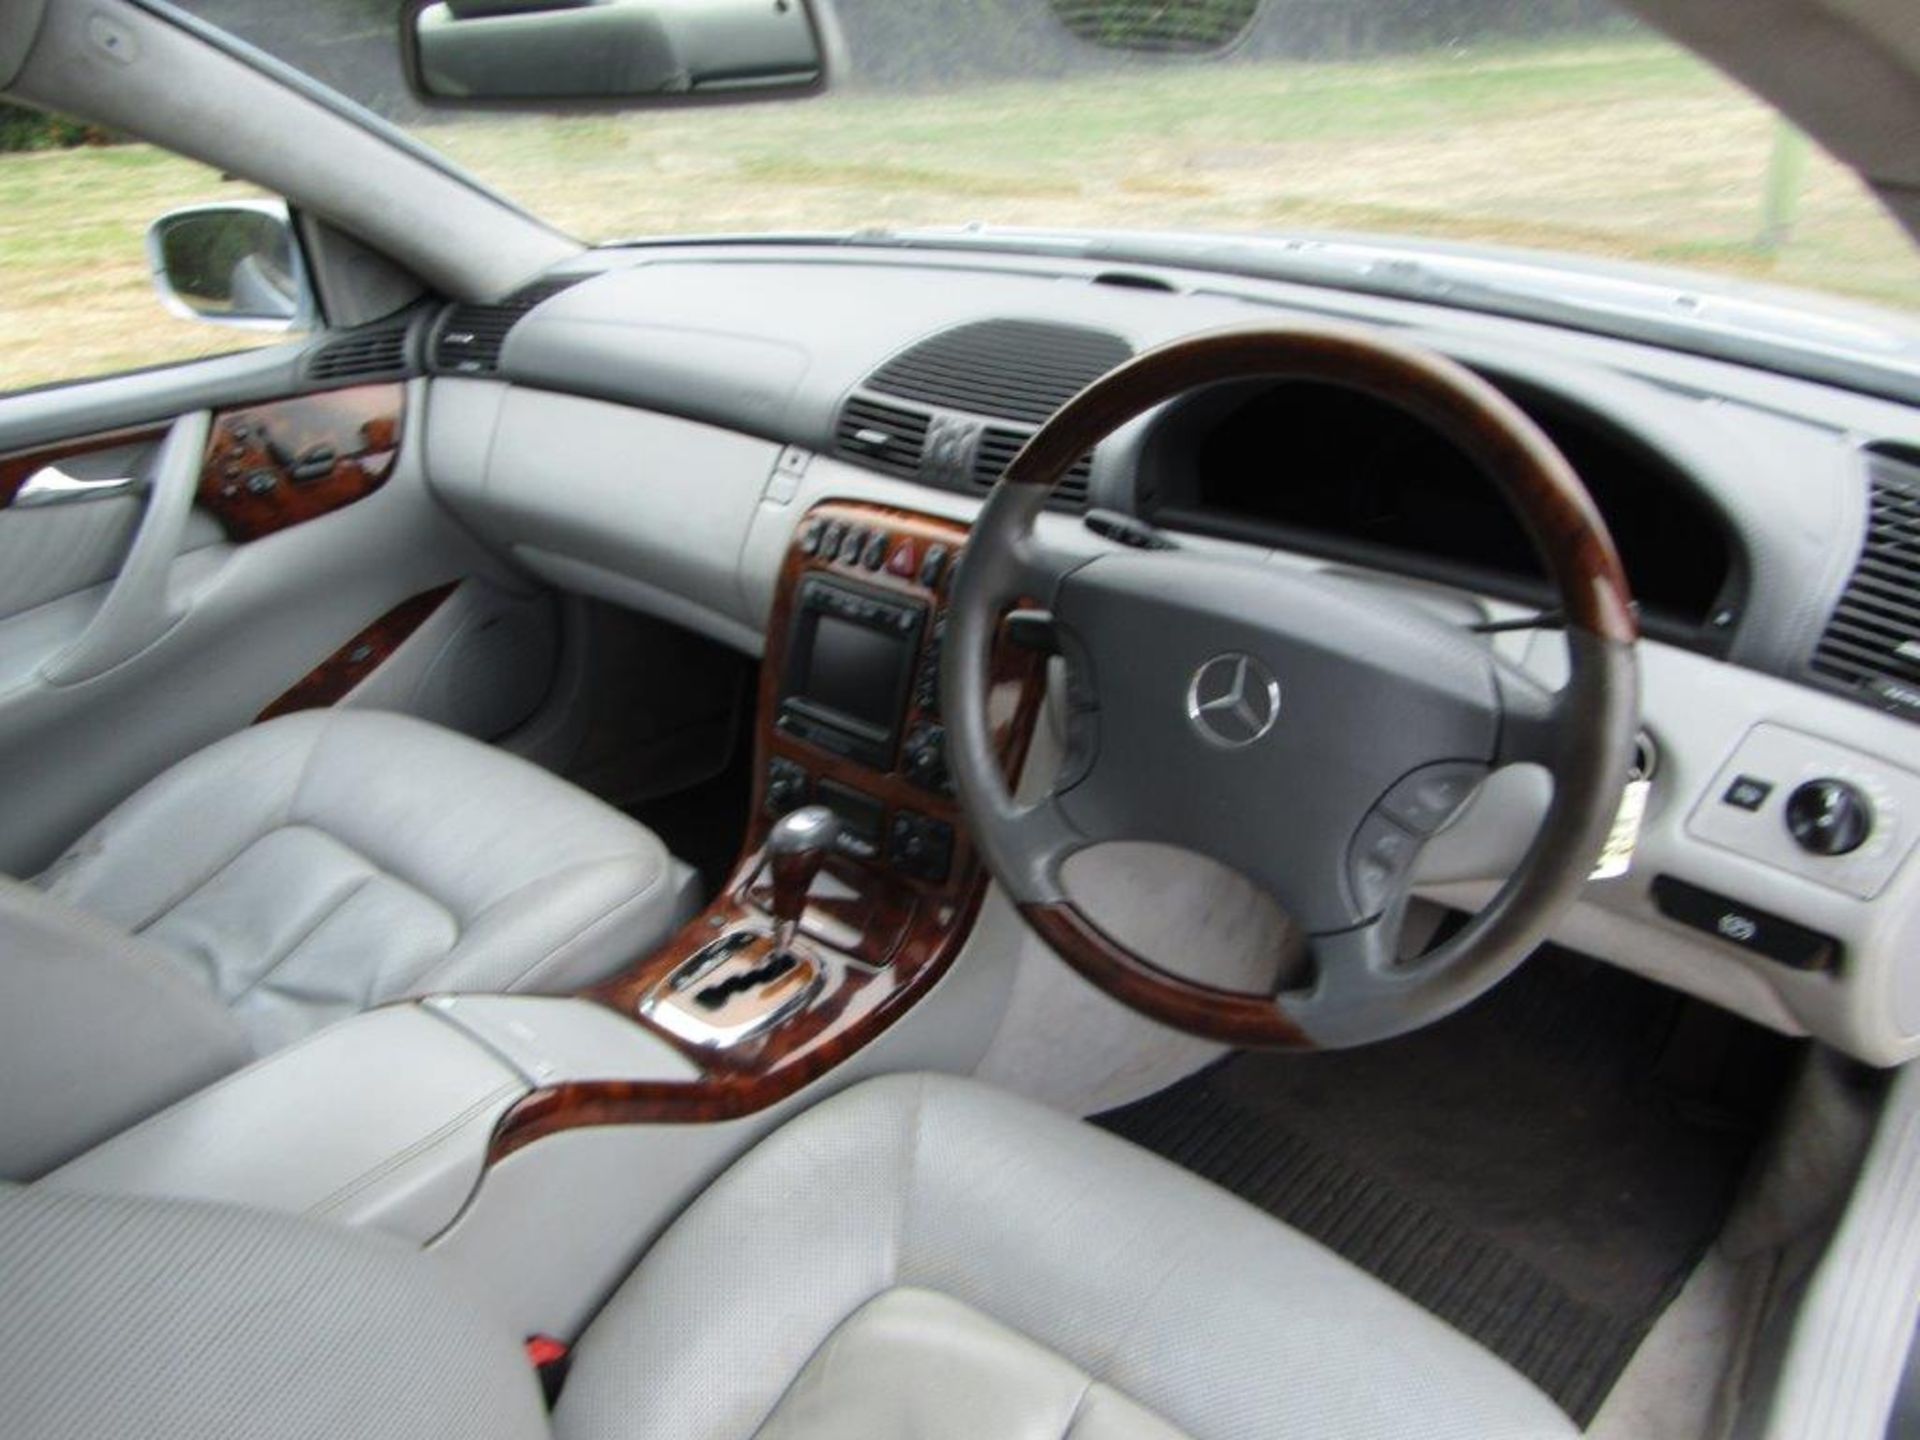 2002 Mercedes CL500 Coupe - Image 11 of 12